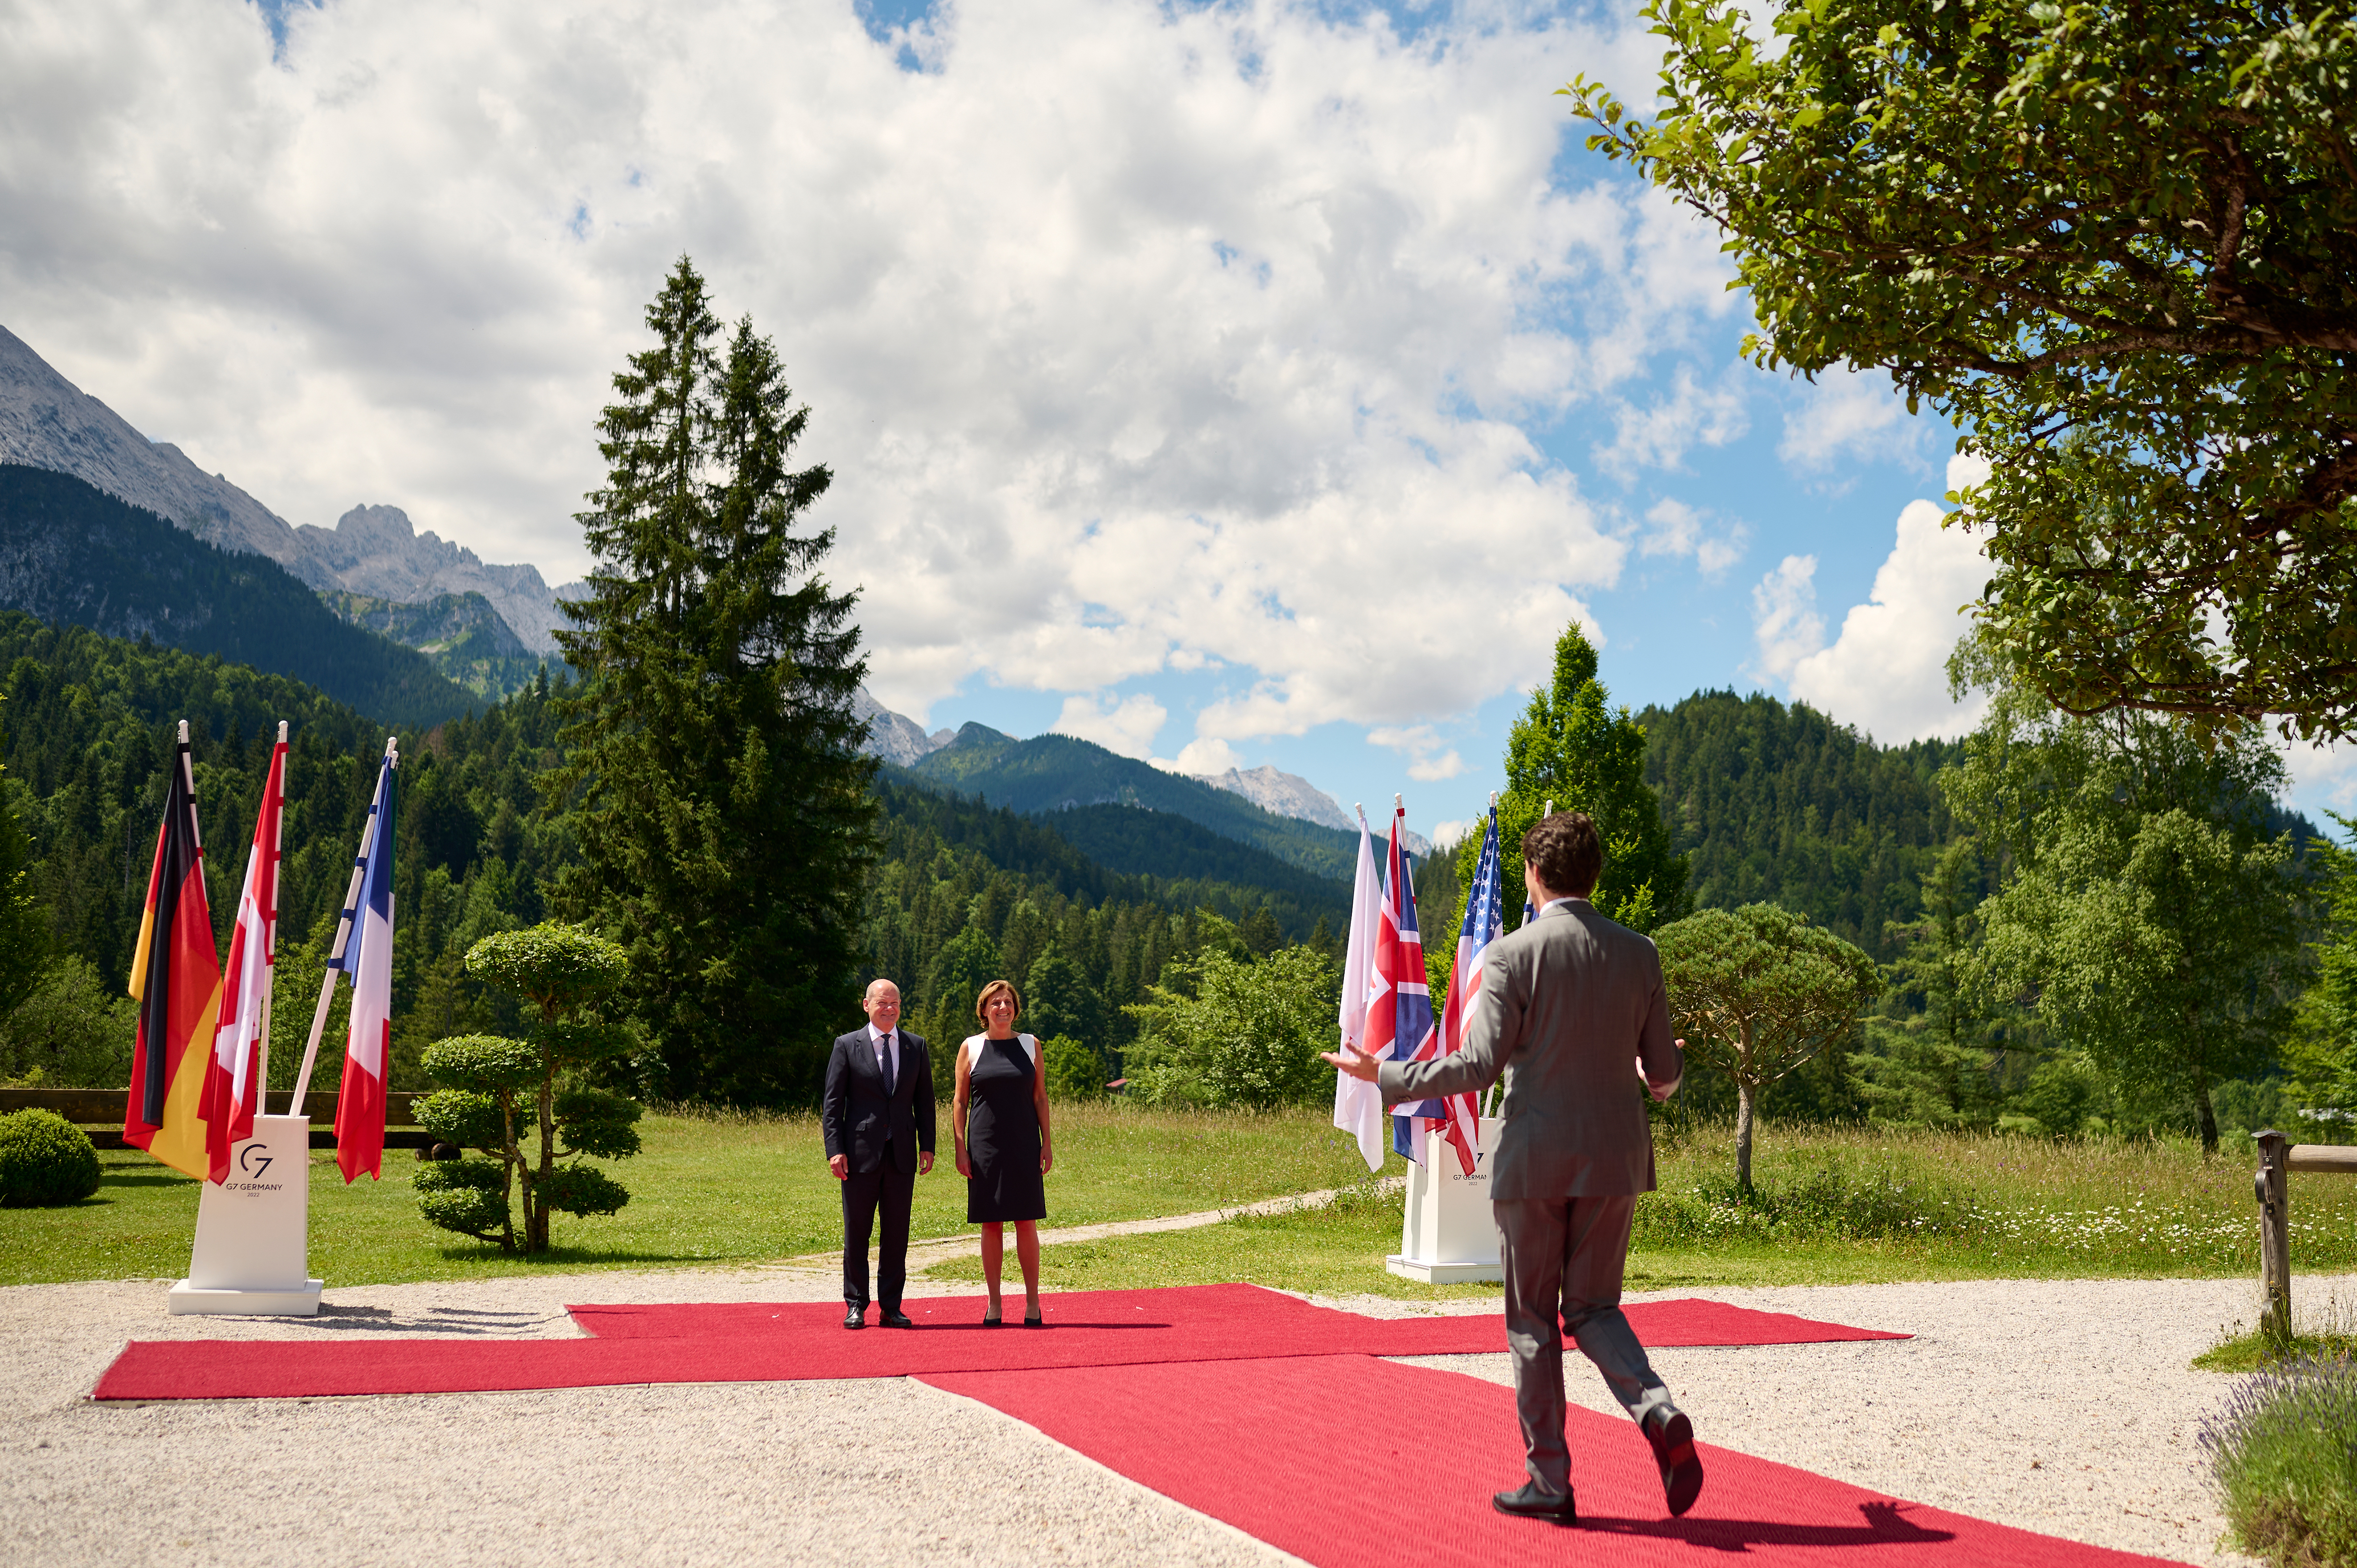 Federal Chancellor Olaf Scholz and his wife Britta Ernst welcome Canadian Prime Minister Justin Trudeau to the G7 summit at Schloss Elmau.